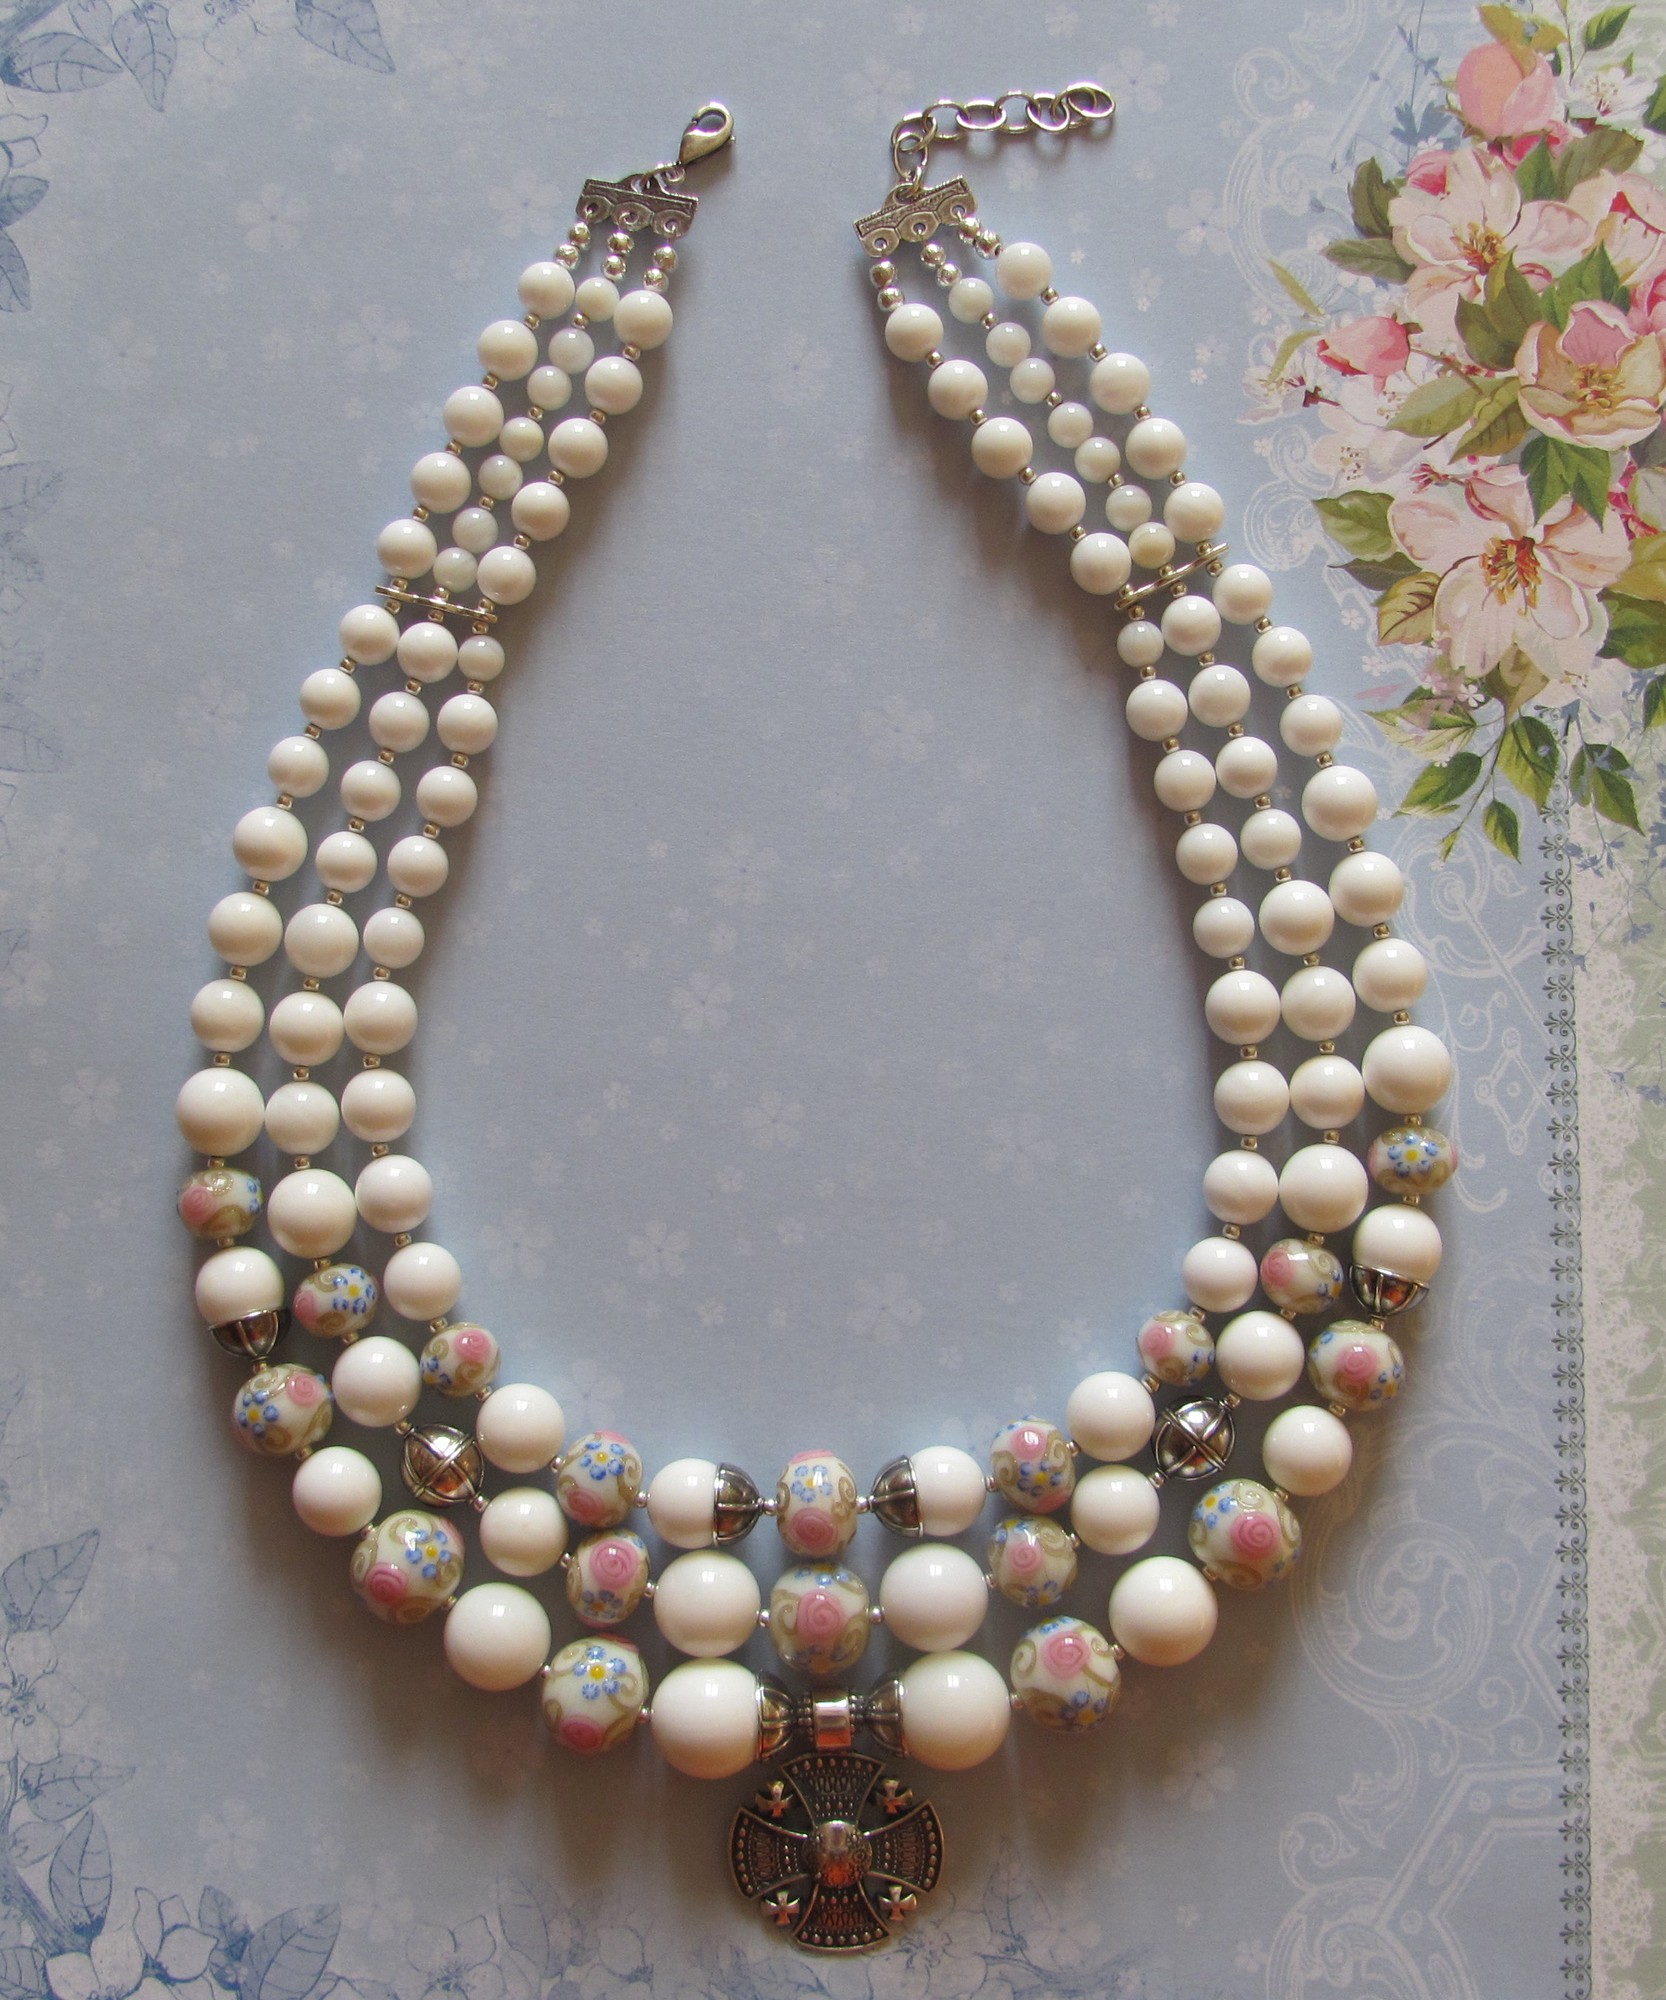 Necklace «Snow White» from glass beads, mother-of-pearl beads and silver